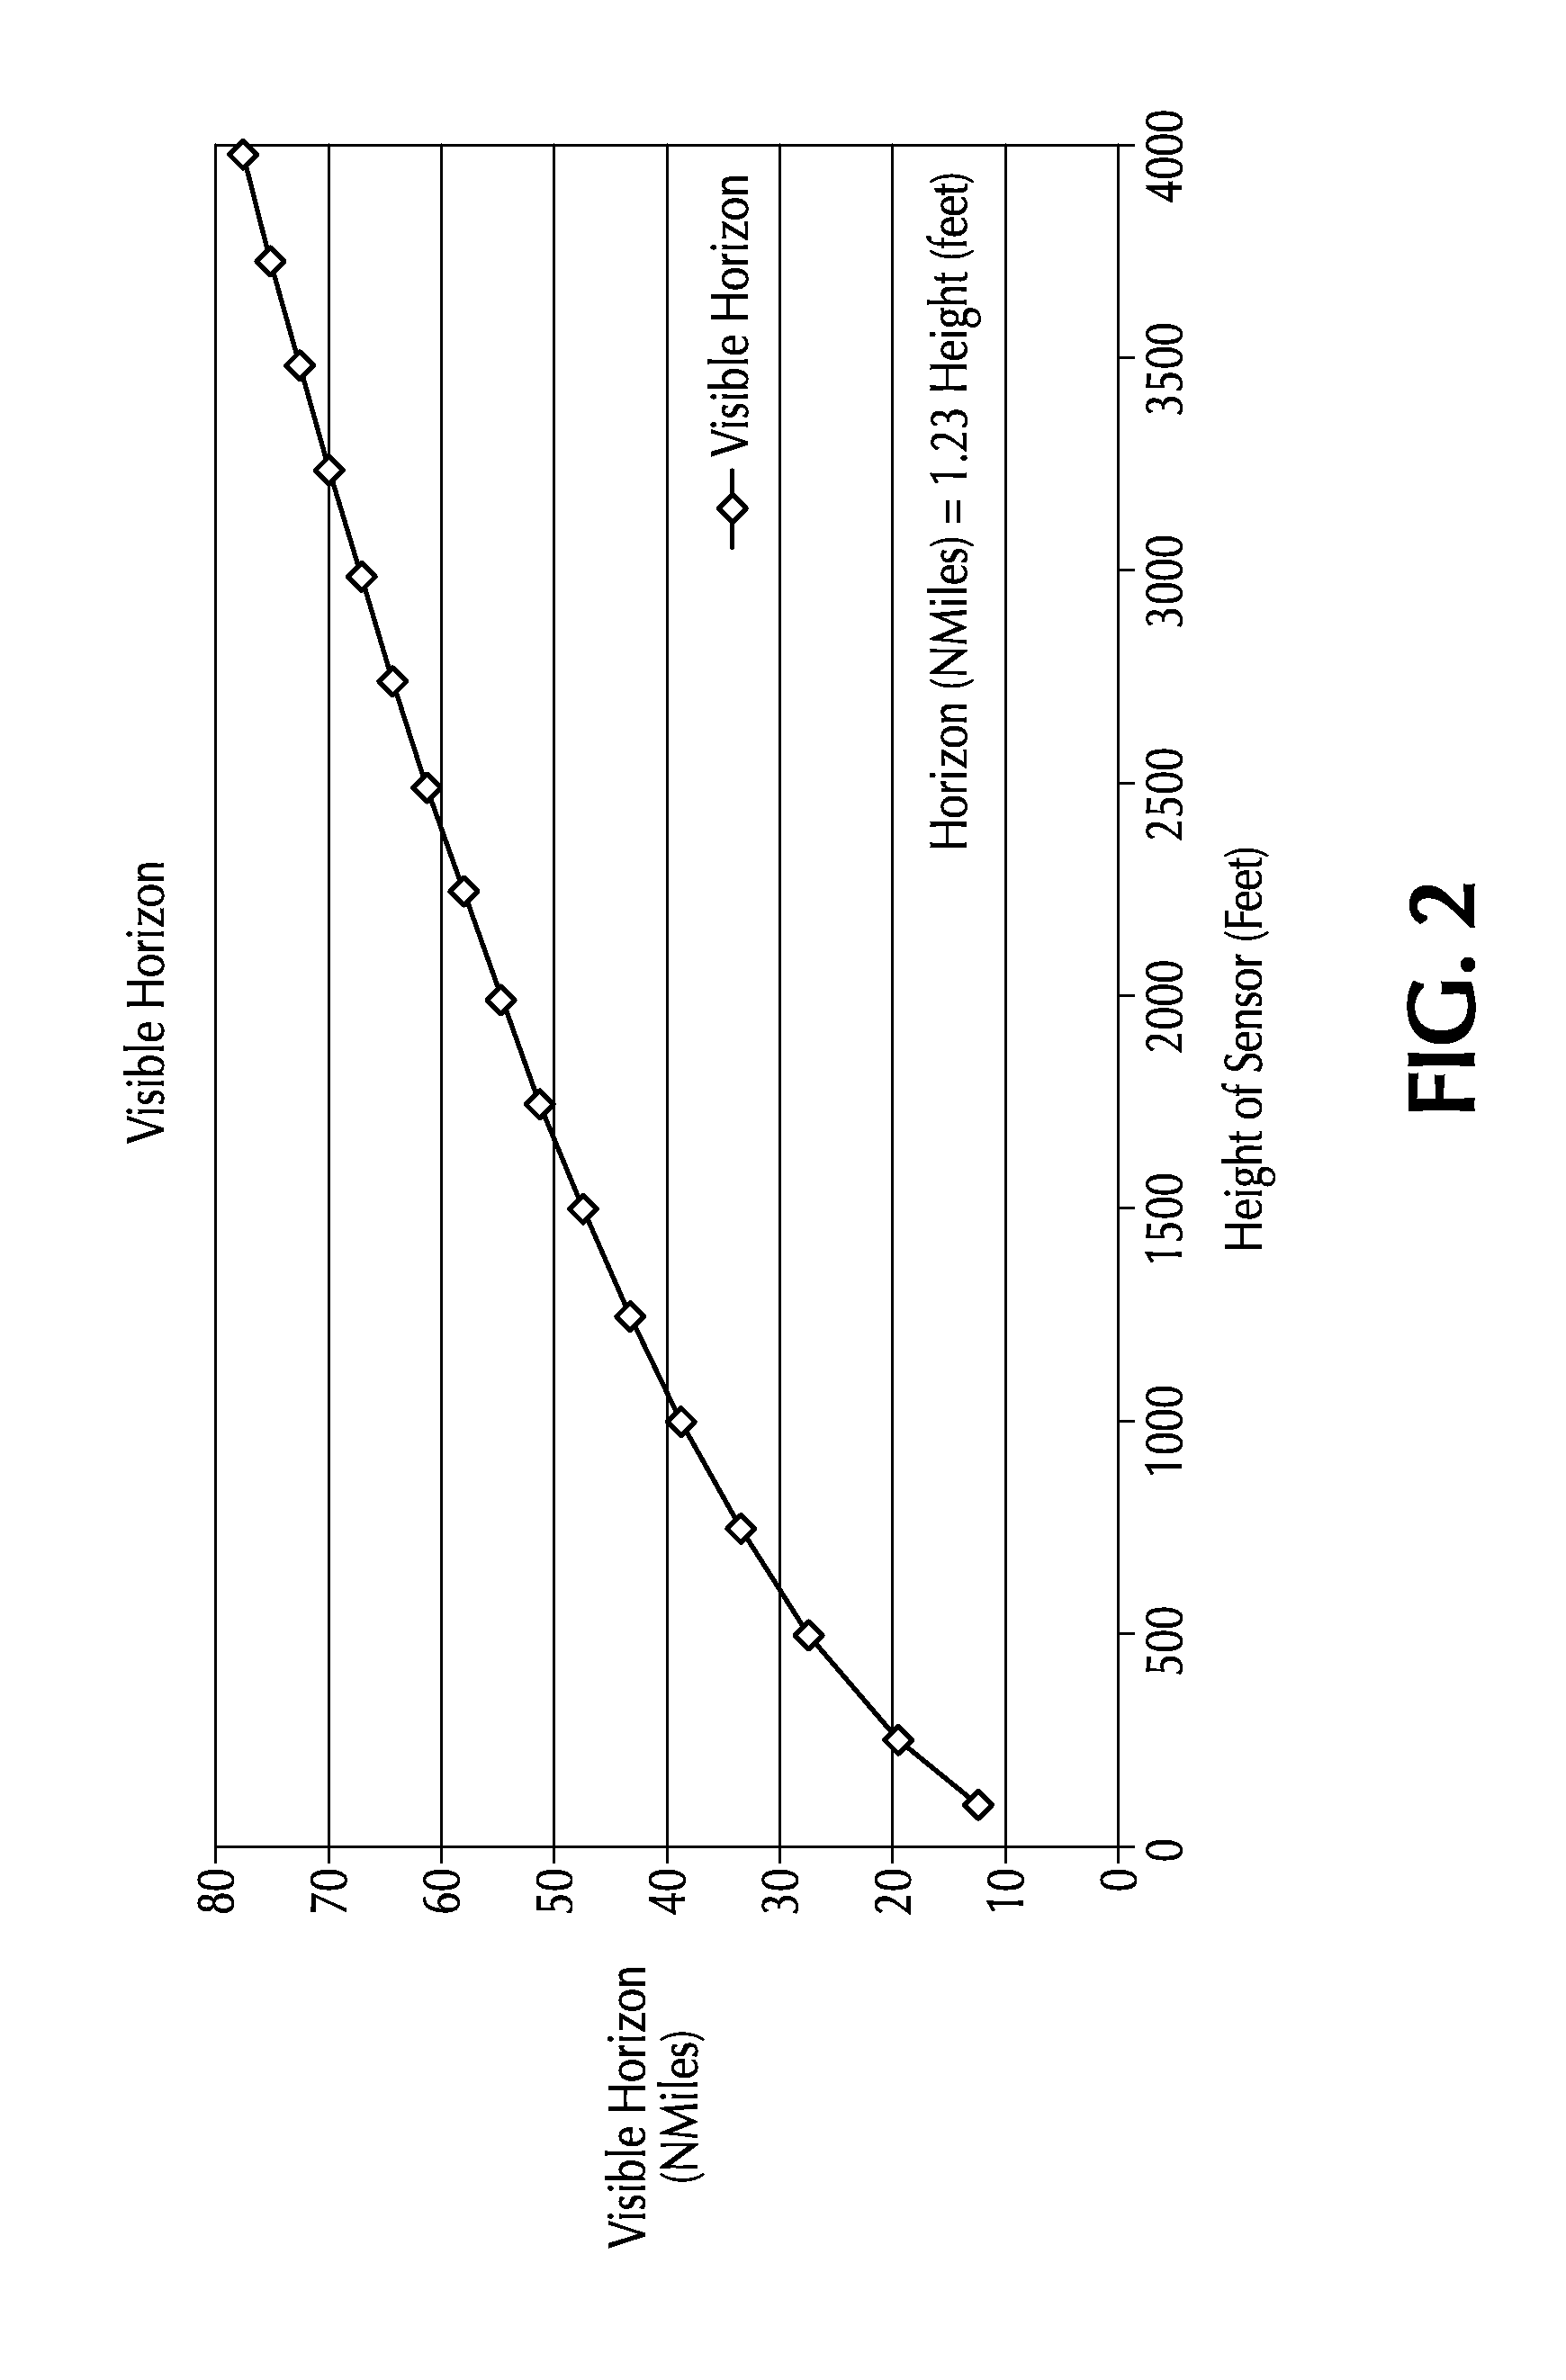 Tethered payload system and method